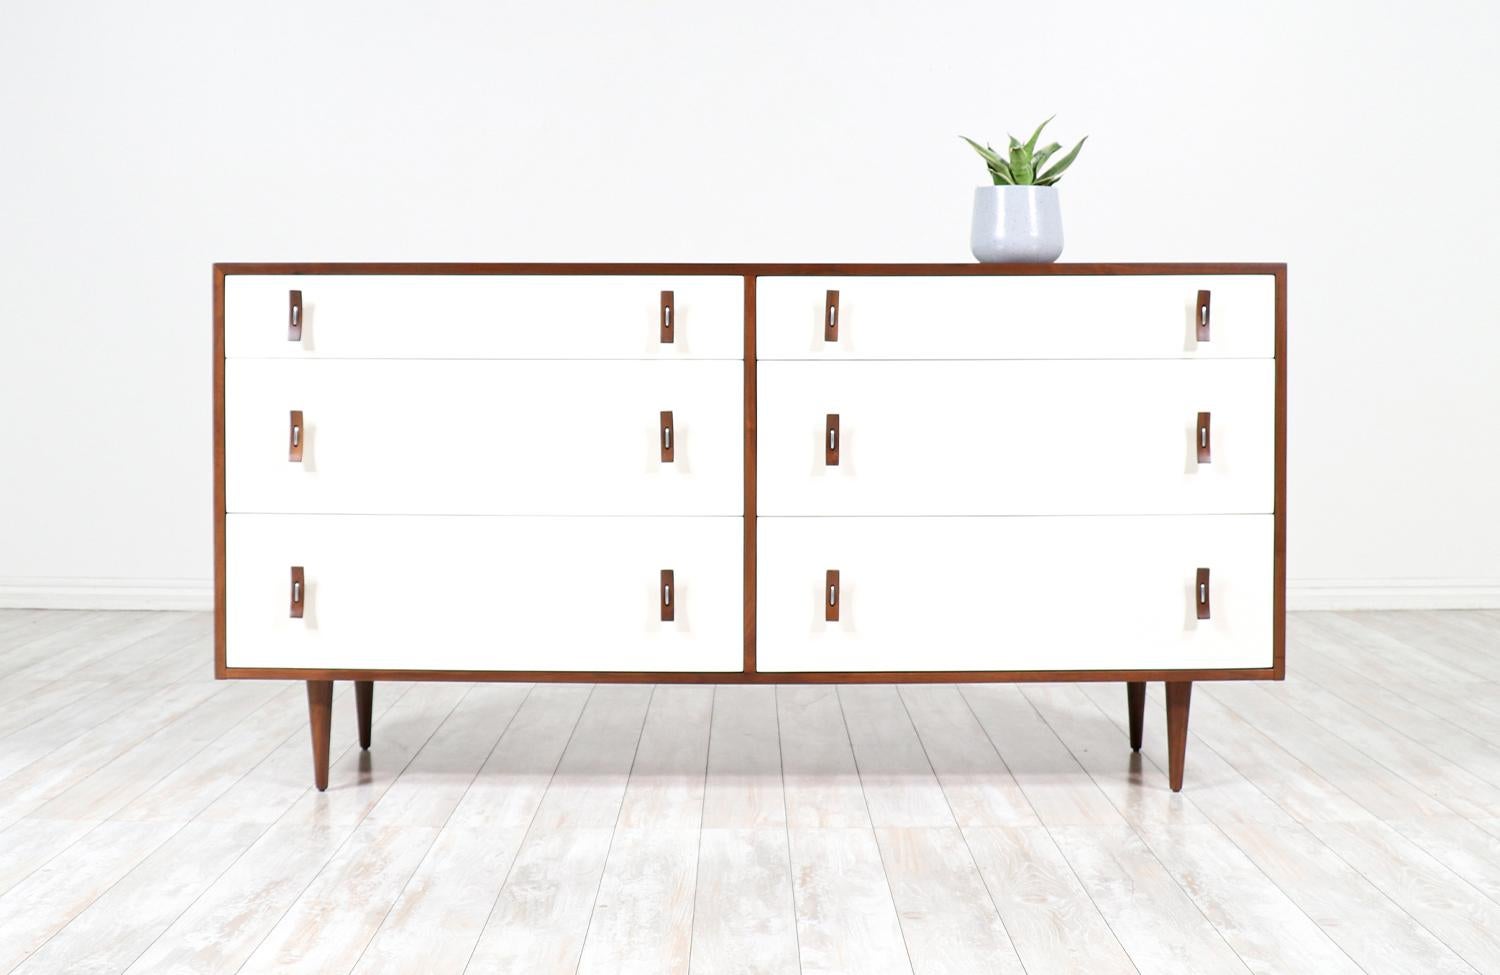 A beautiful six drawer dresser designed by Stanley Young for Glenn of California in the United States circa 1950s. This stylish dresser features the designer’s signature bentwood and steel pulls on each of the white lacquered drawers that open to